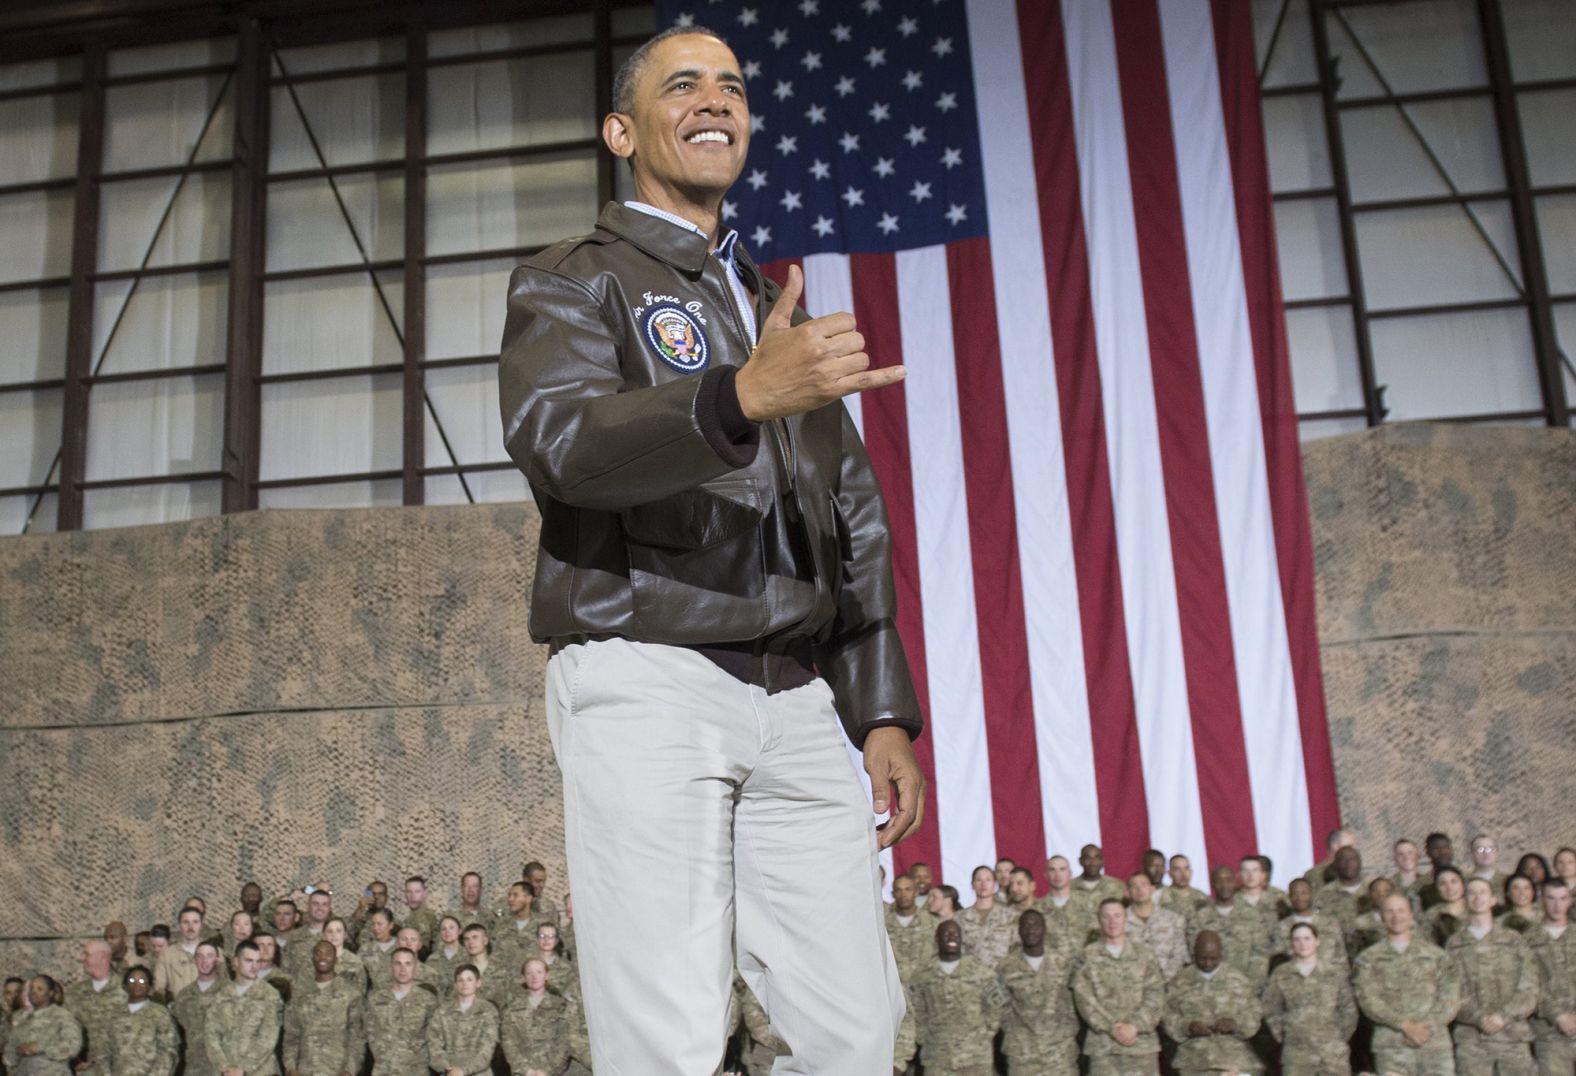 Obama greets US troops during a surprise visit to Afghanistan in May 2014.